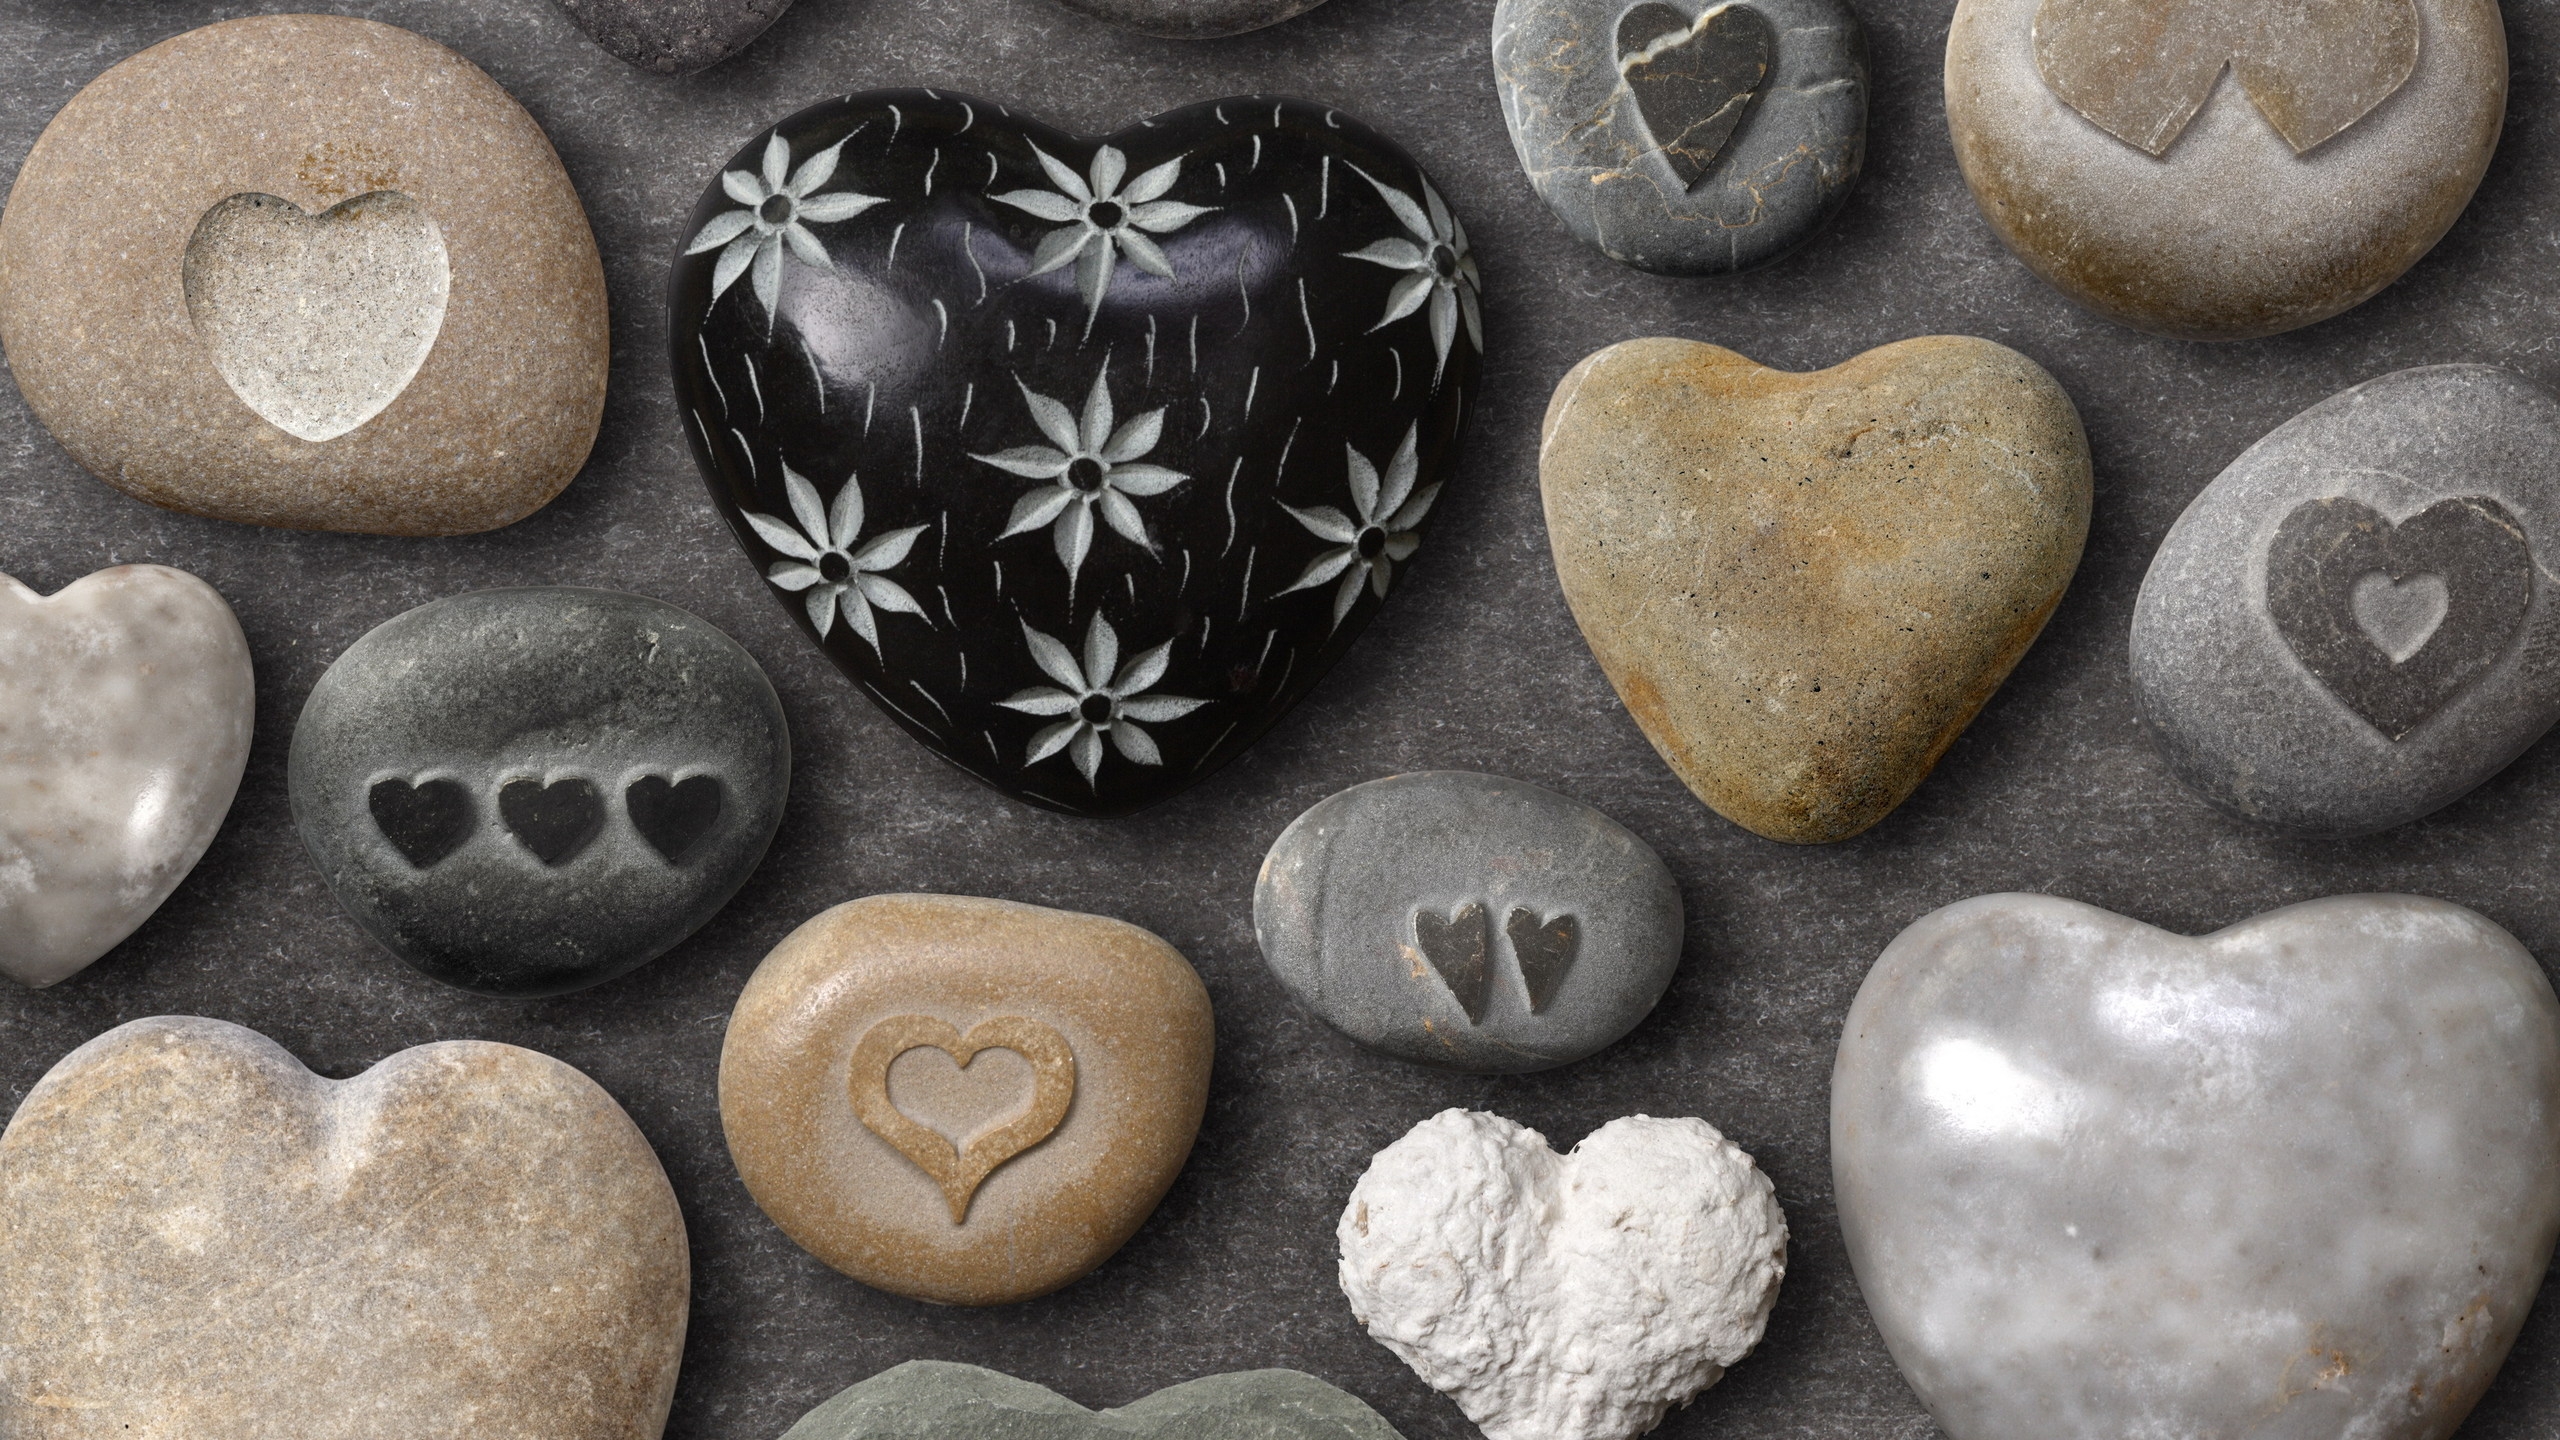 Pebbles of Love for 2560x1440 HDTV resolution